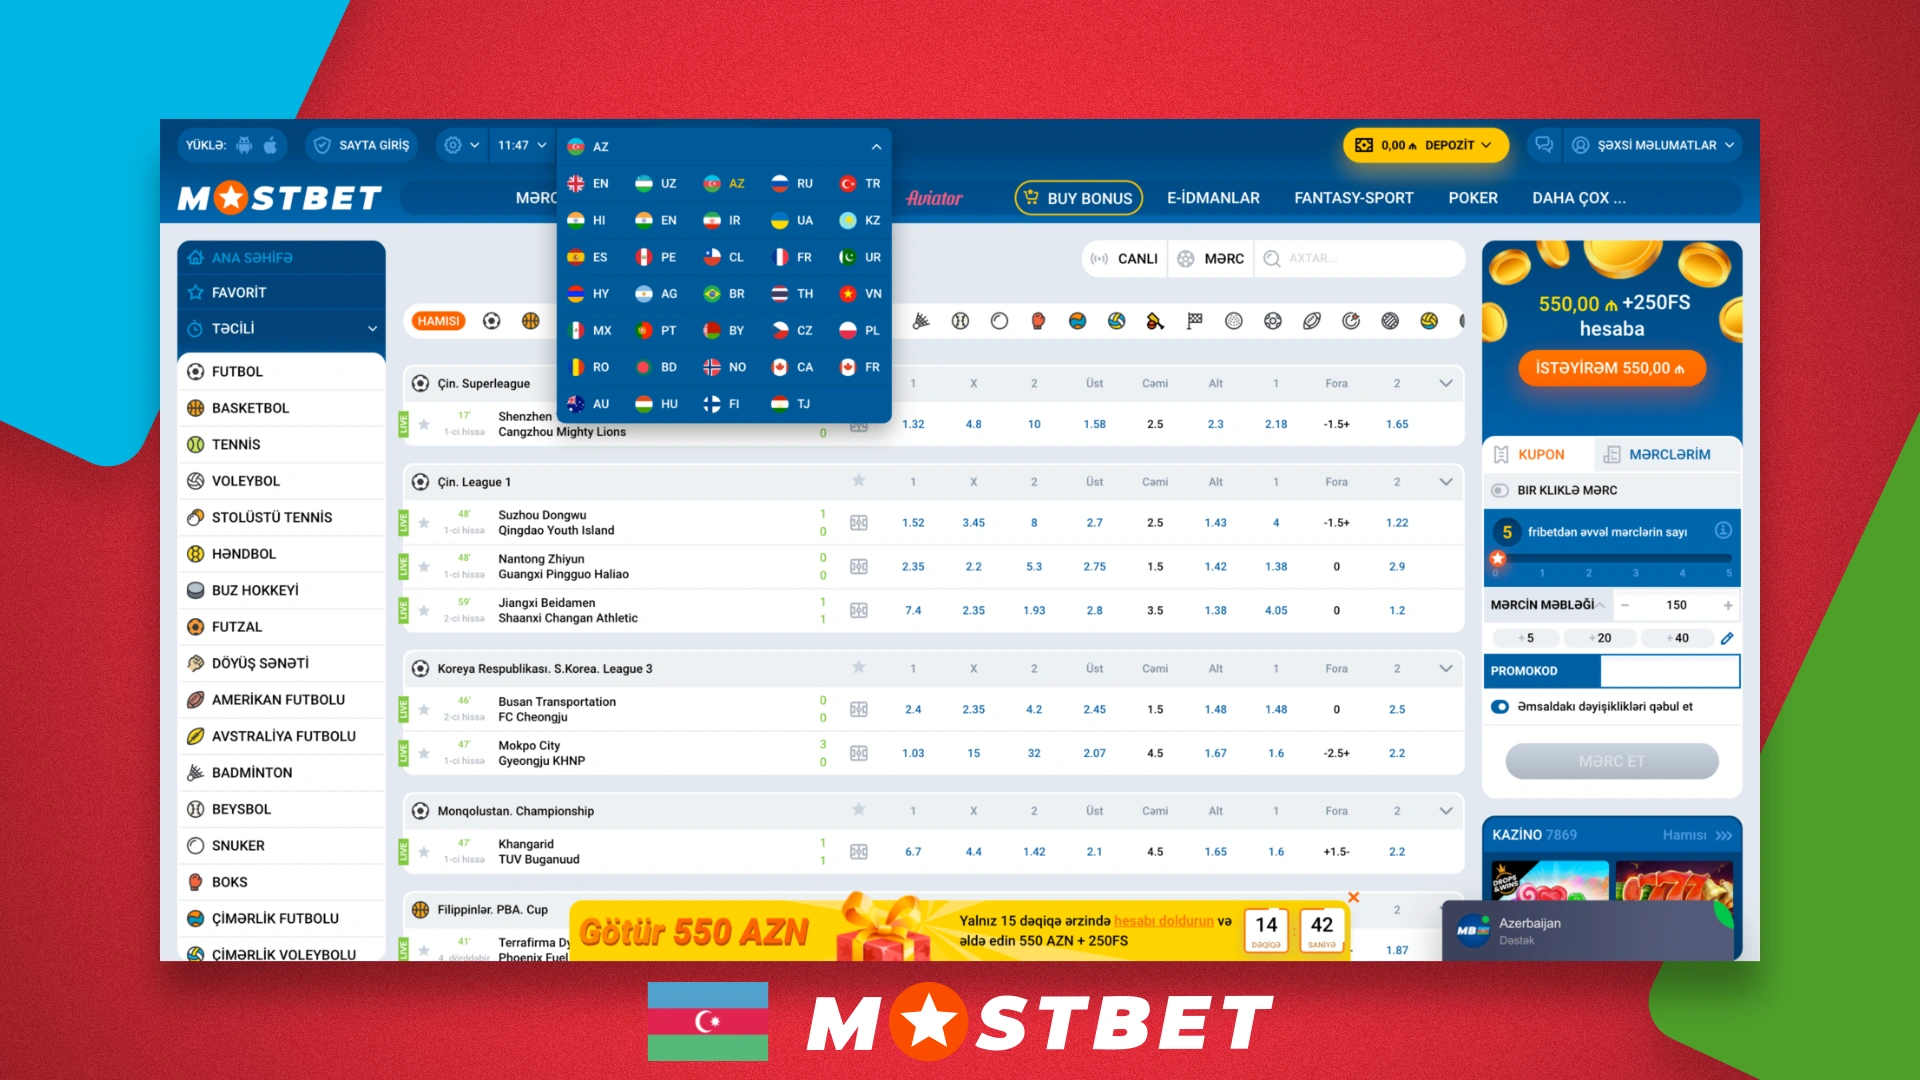 Home page of the official site Mostbet AZ